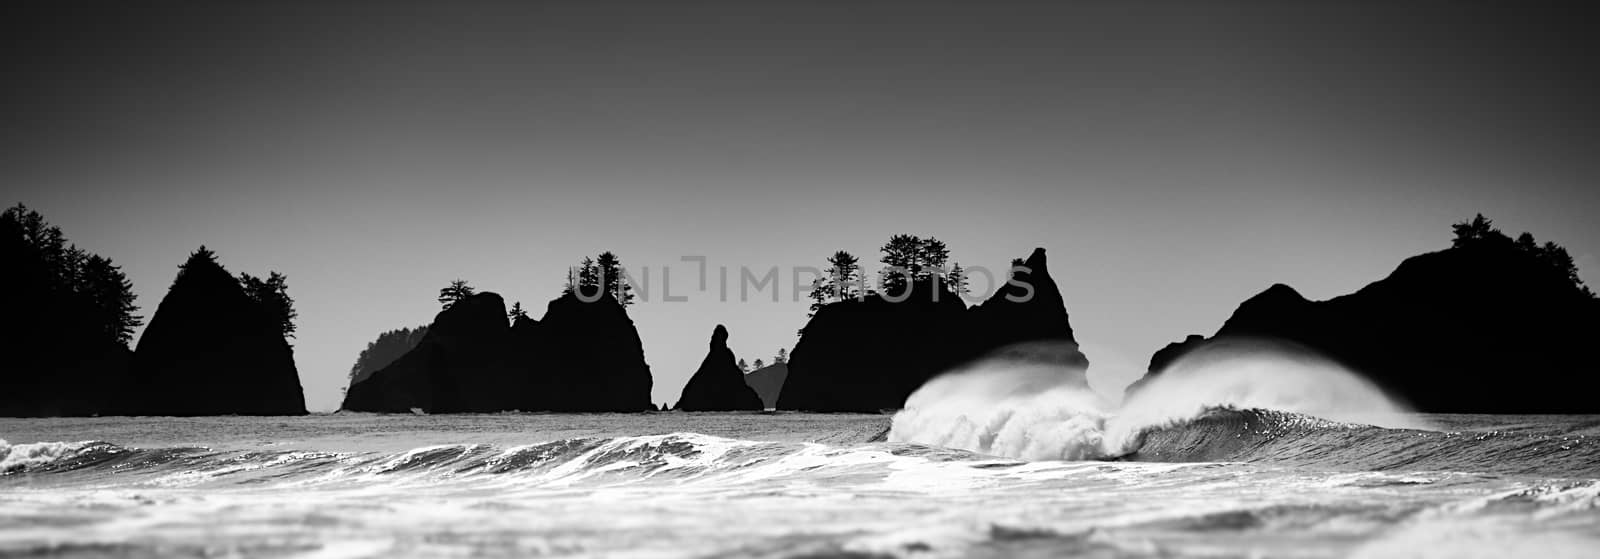 Pacific Coast Seascape with islands and waves